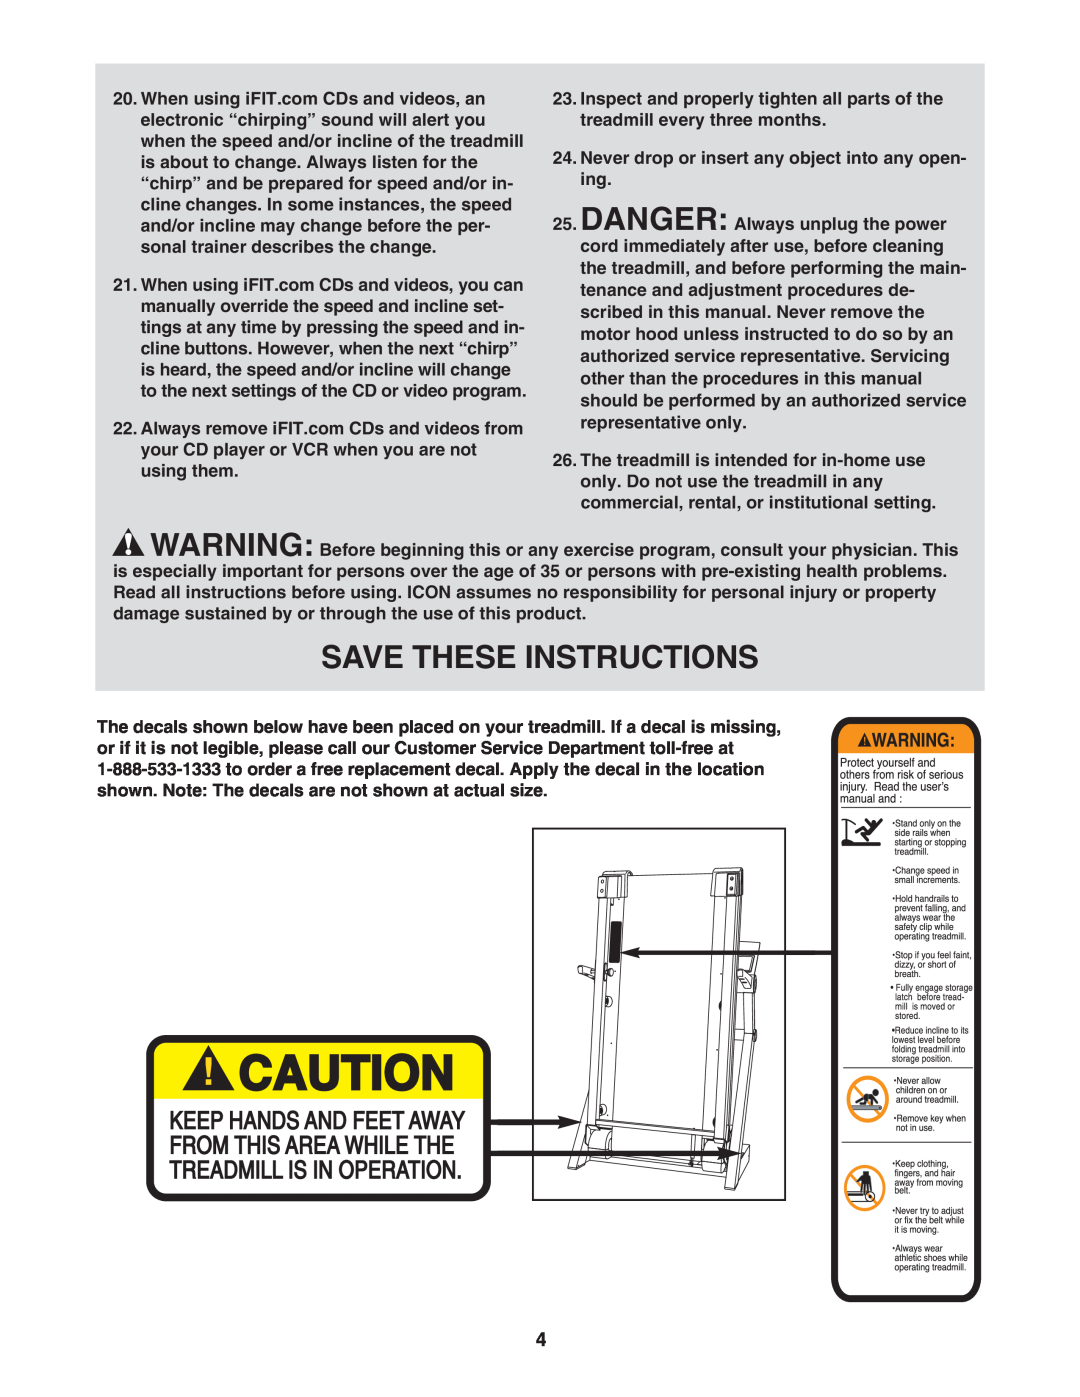 ProForm DTL73942 user manual Save These Instructions, Never drop or insert any object into any open- ing 